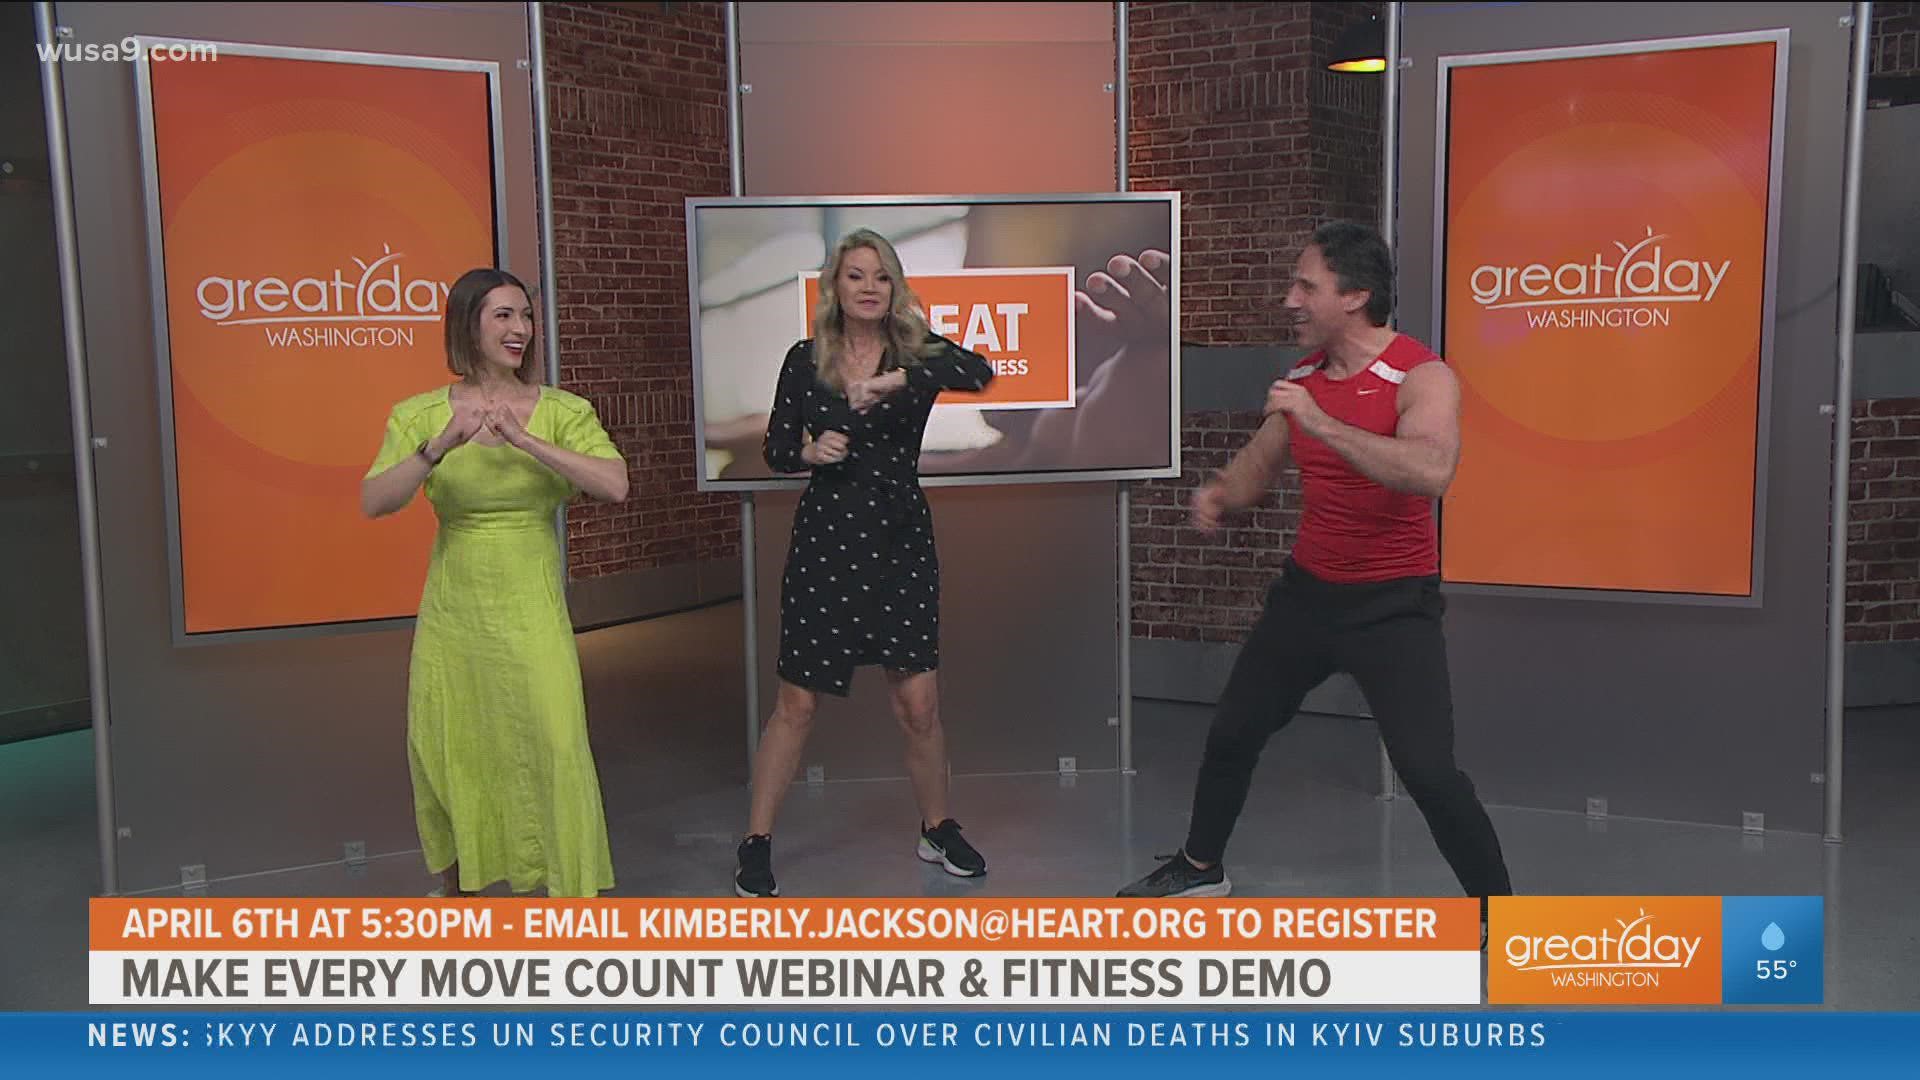 International Fitness Expert Laurent Amzallag along with the American Heart Association urge everyone to start getting back in shape by getting active everyday.